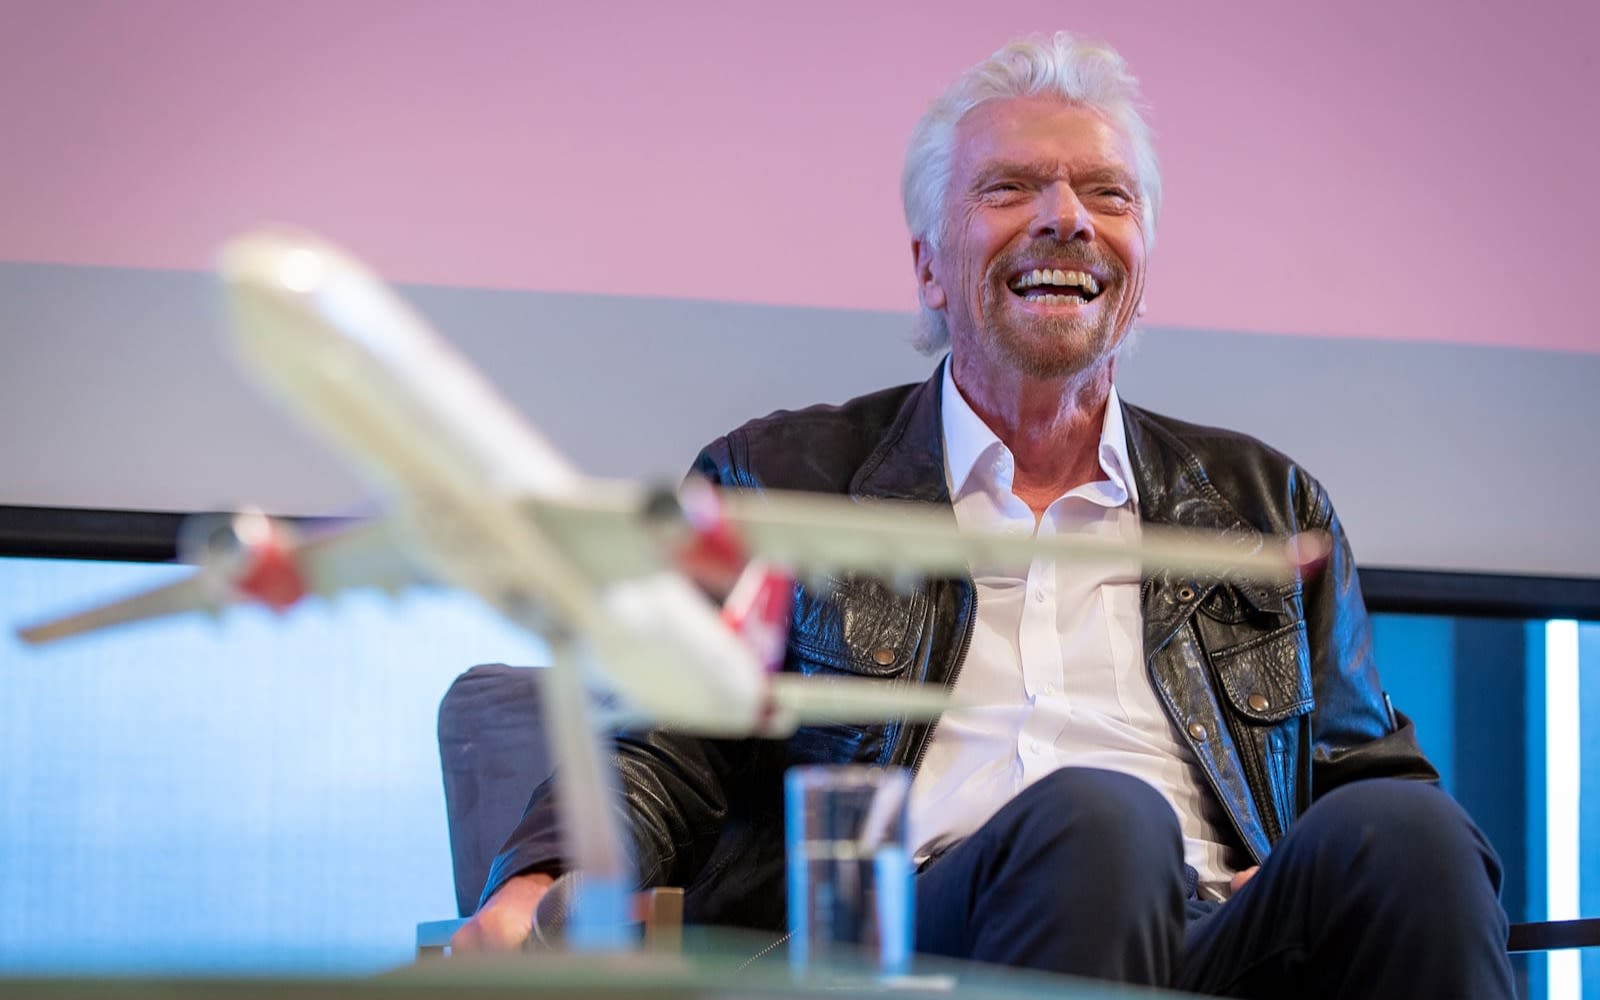 Richard Branson smiling with a model aeroplane in the foreground